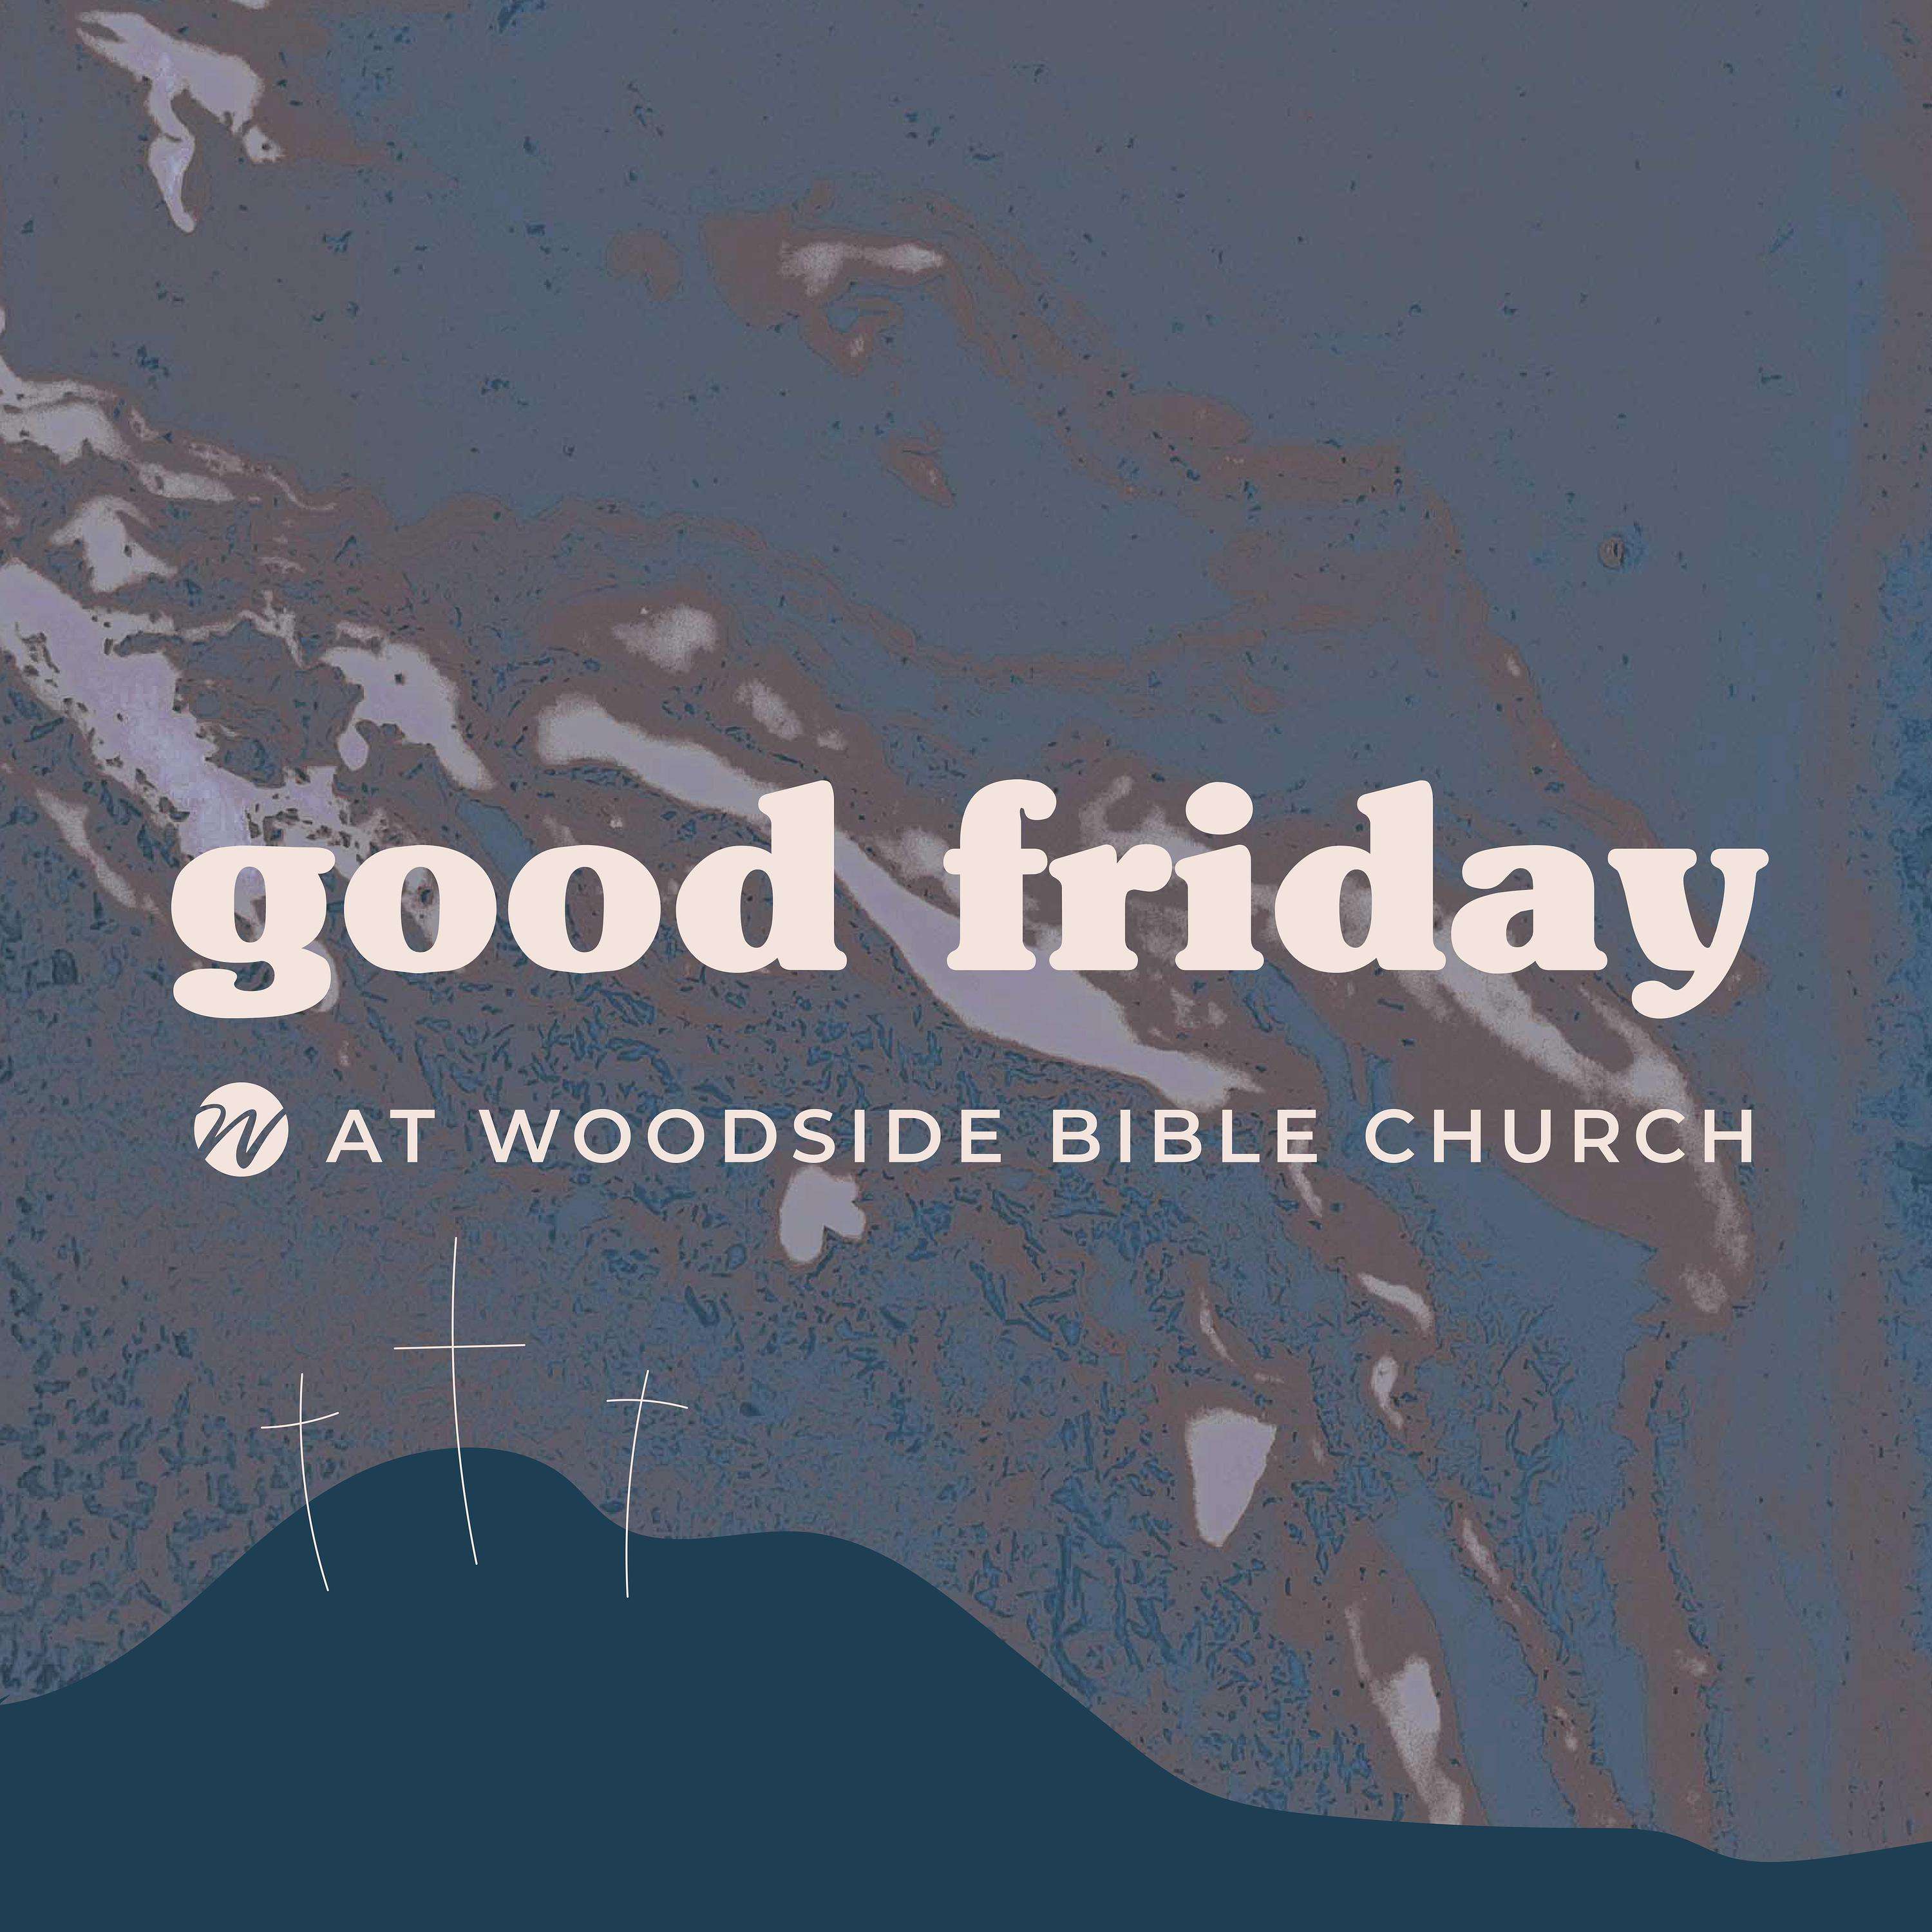 Good Friday Service - Opinionated - Woodside Bible Church